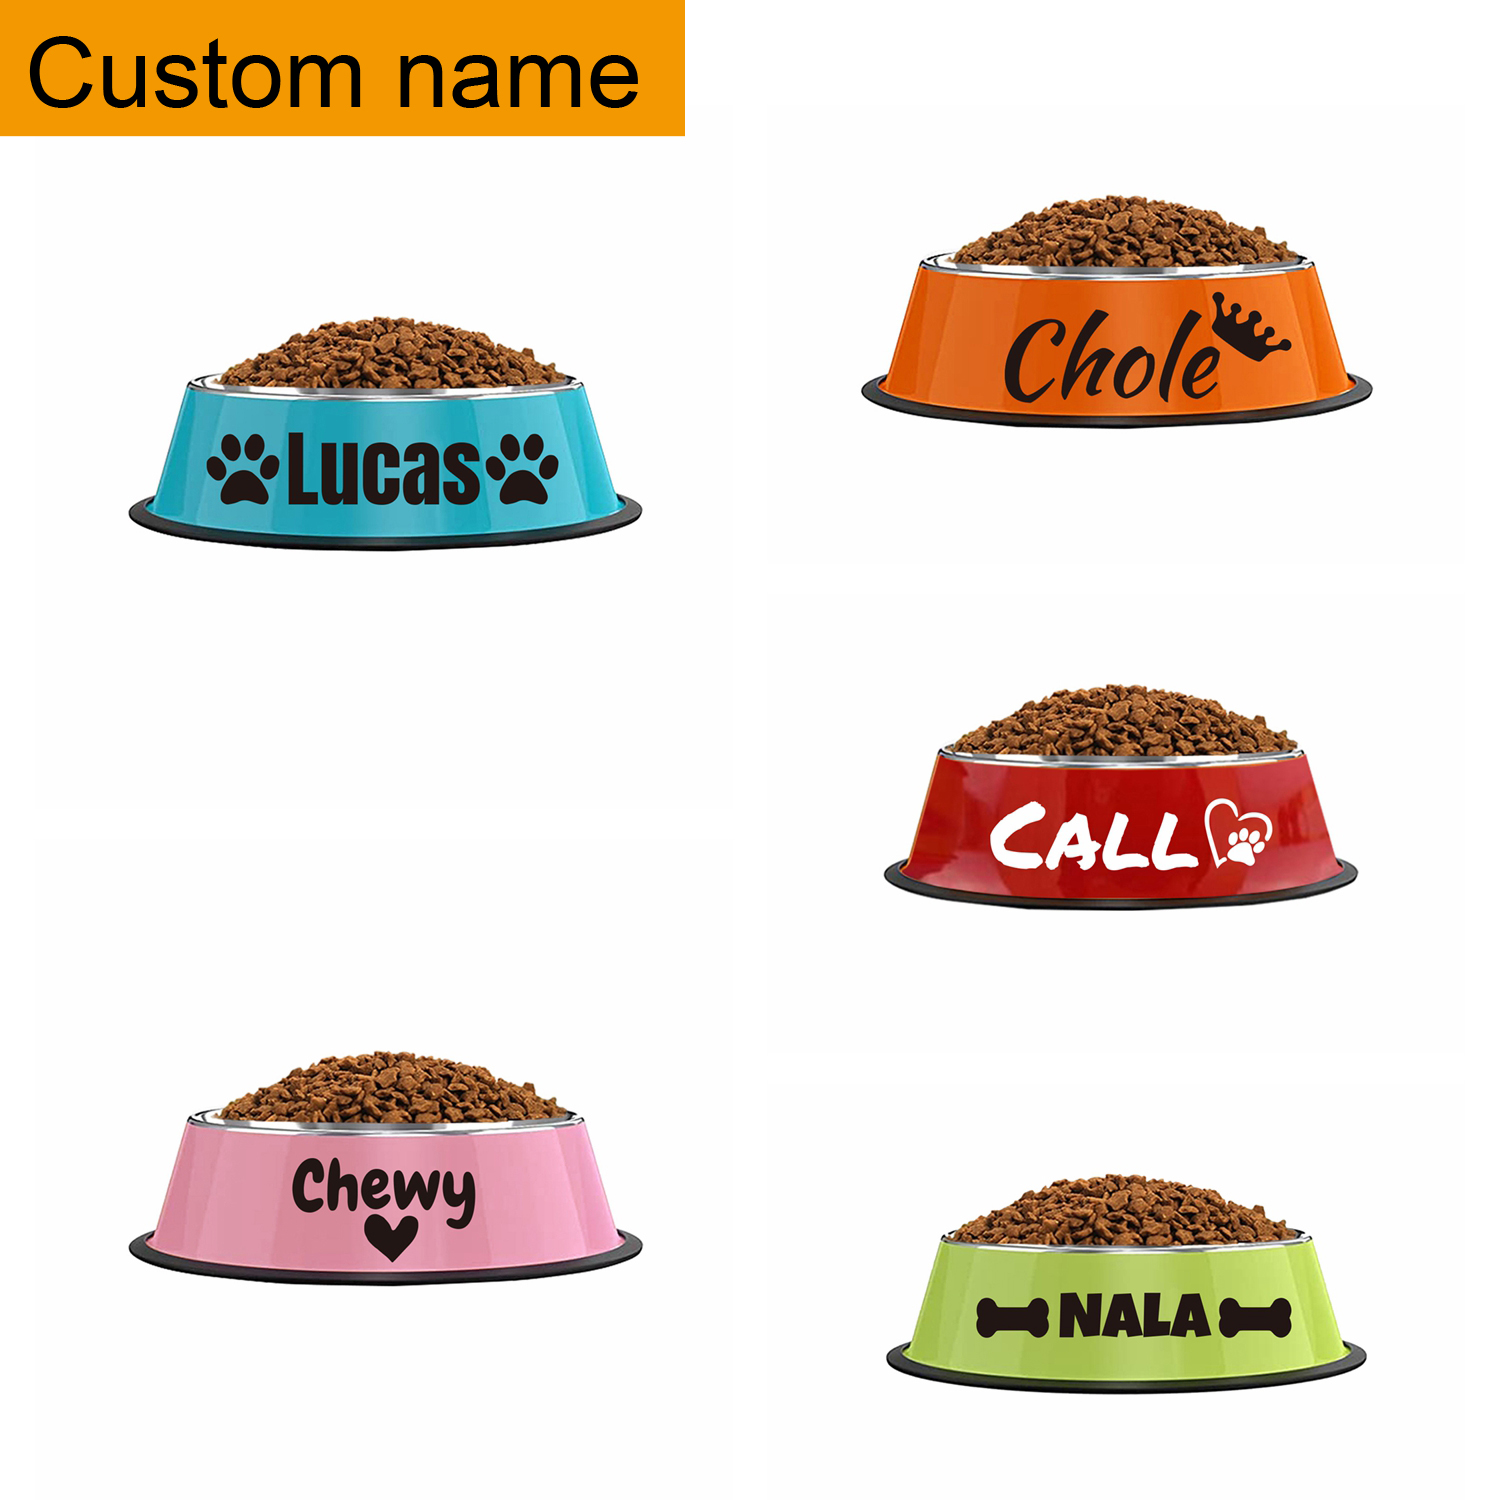 Personalized Non-slip Stainless Steel Pet Bowl With Custom Name - Ideal For Cats And Dogs, Perfect For Food And Water Supplies